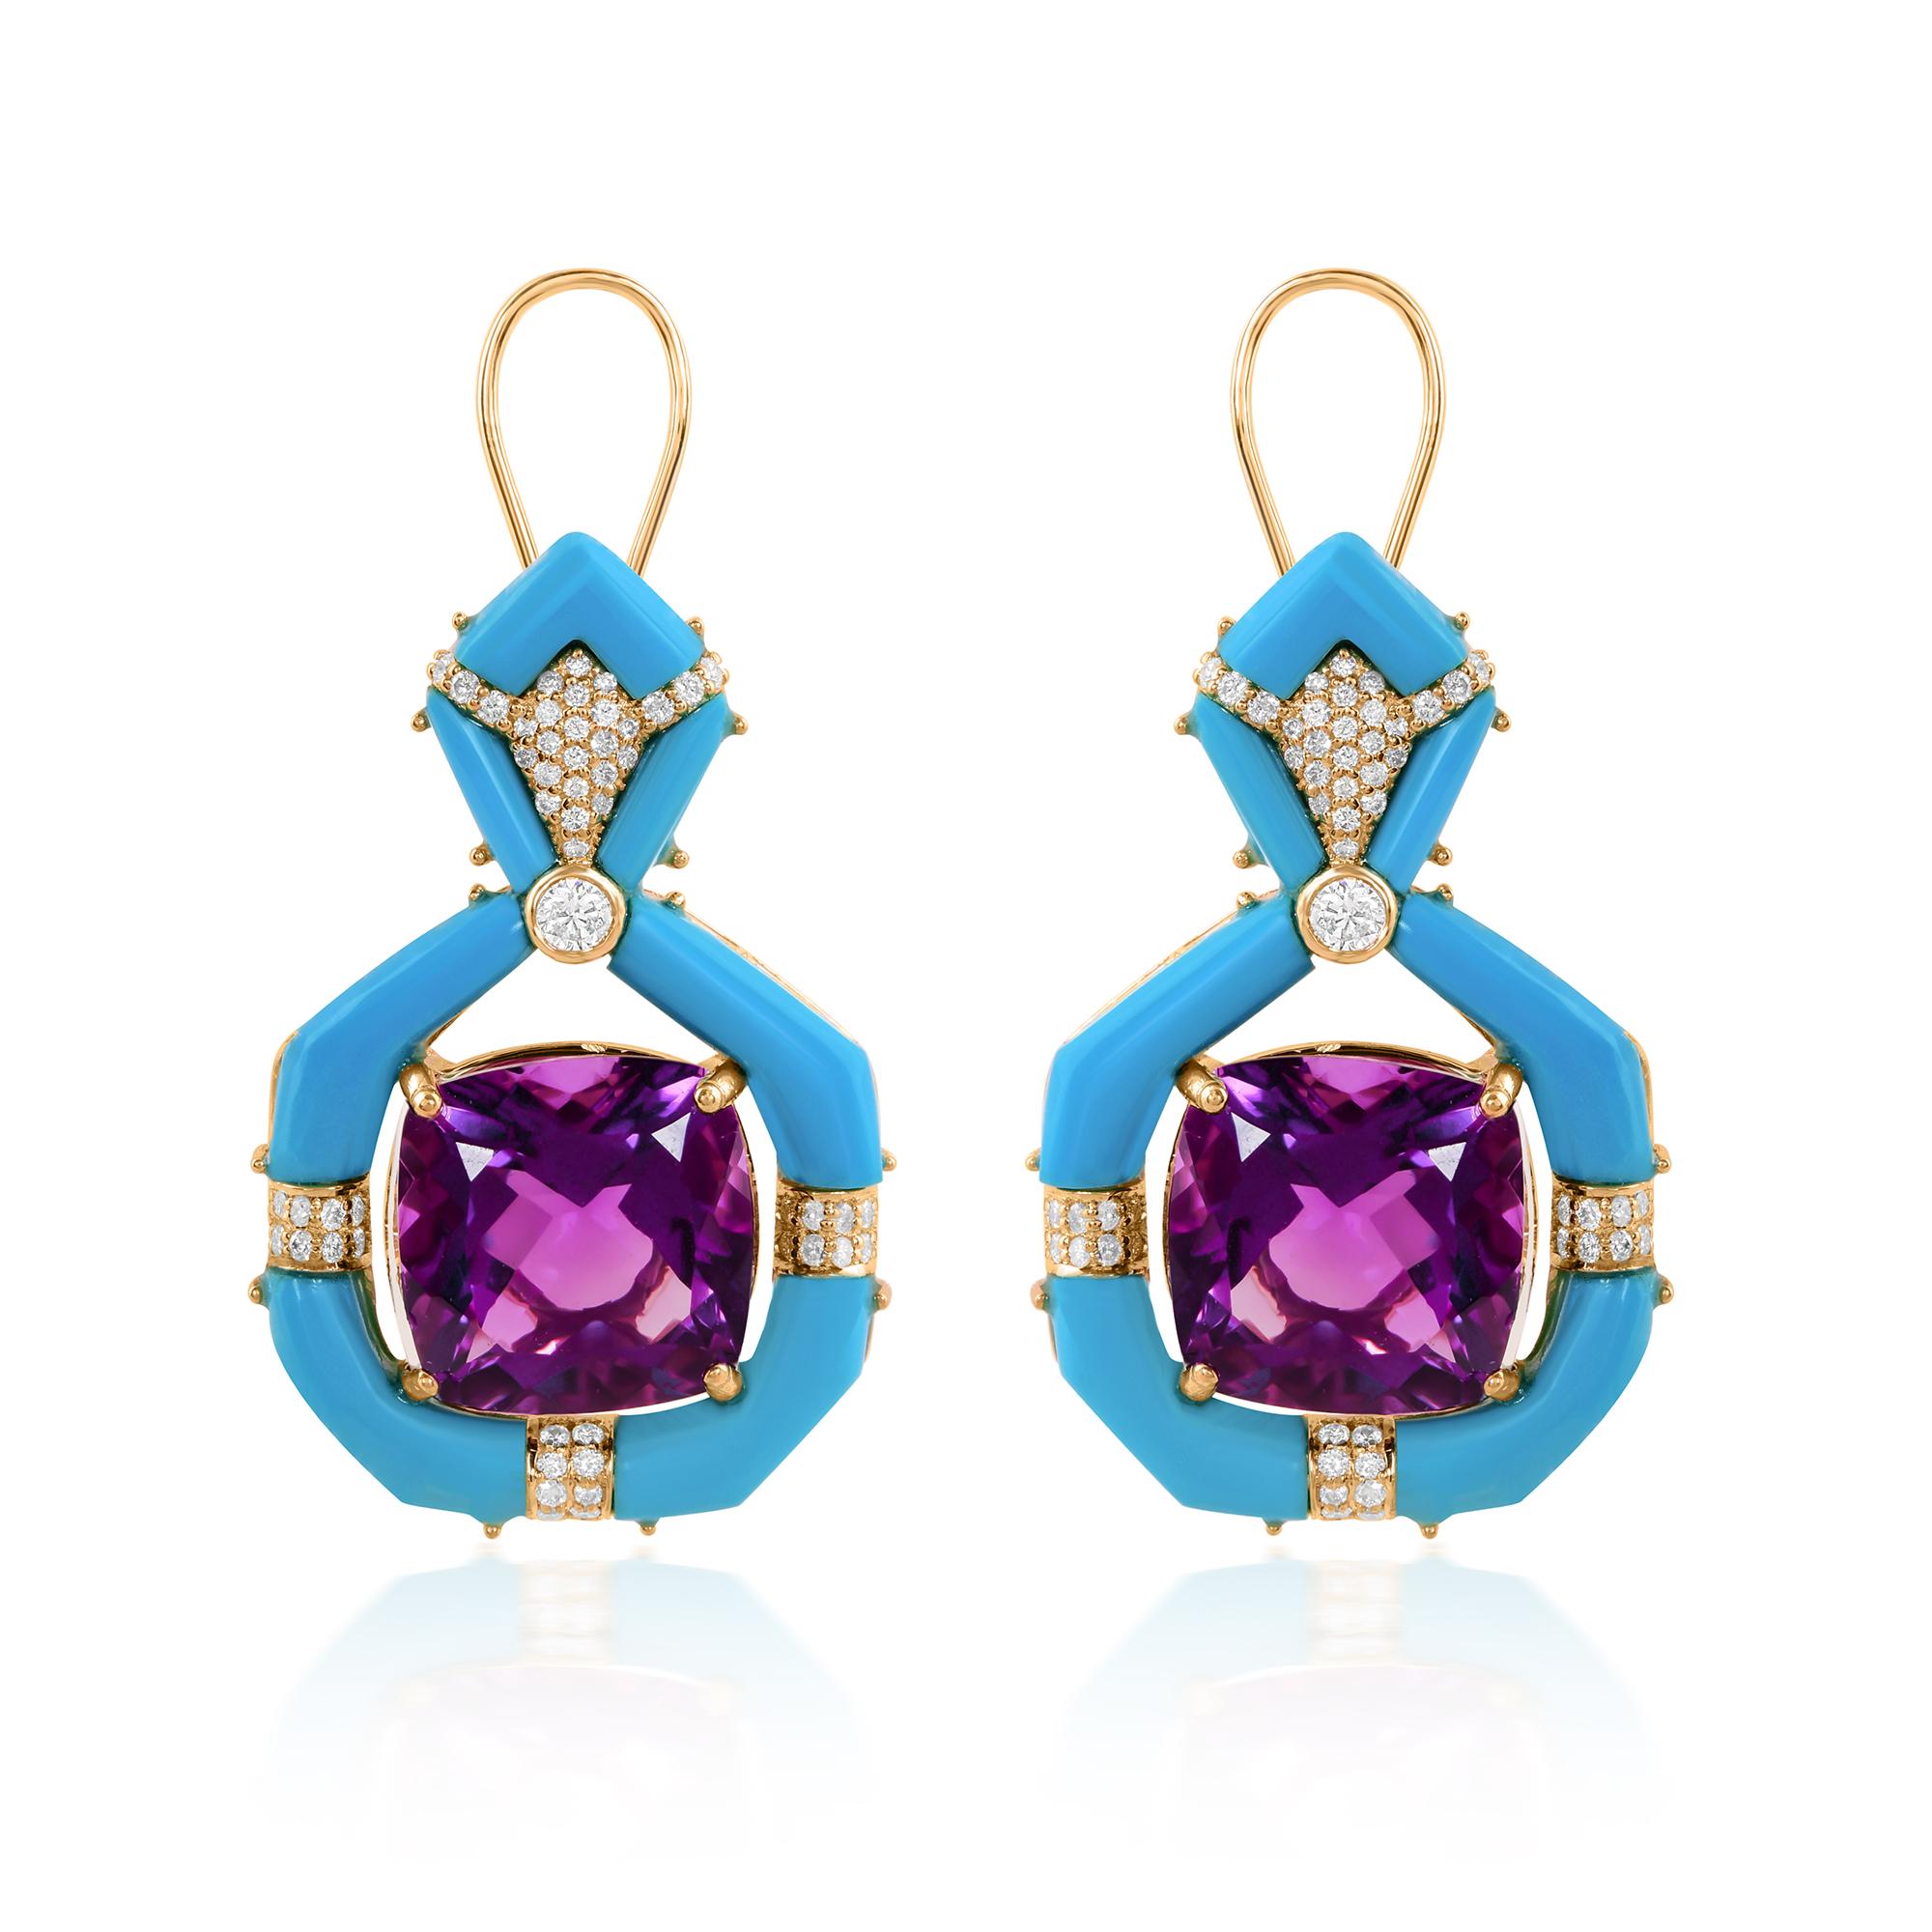 Surrounding the Amethyst Arizona Turquoise gemstones are dazzling diamonds, adding a touch of sparkle and luxury to the design. Each diamond is meticulously chosen for its brilliance and fire, enhancing the overall allure of the earrings.

FOLLOW